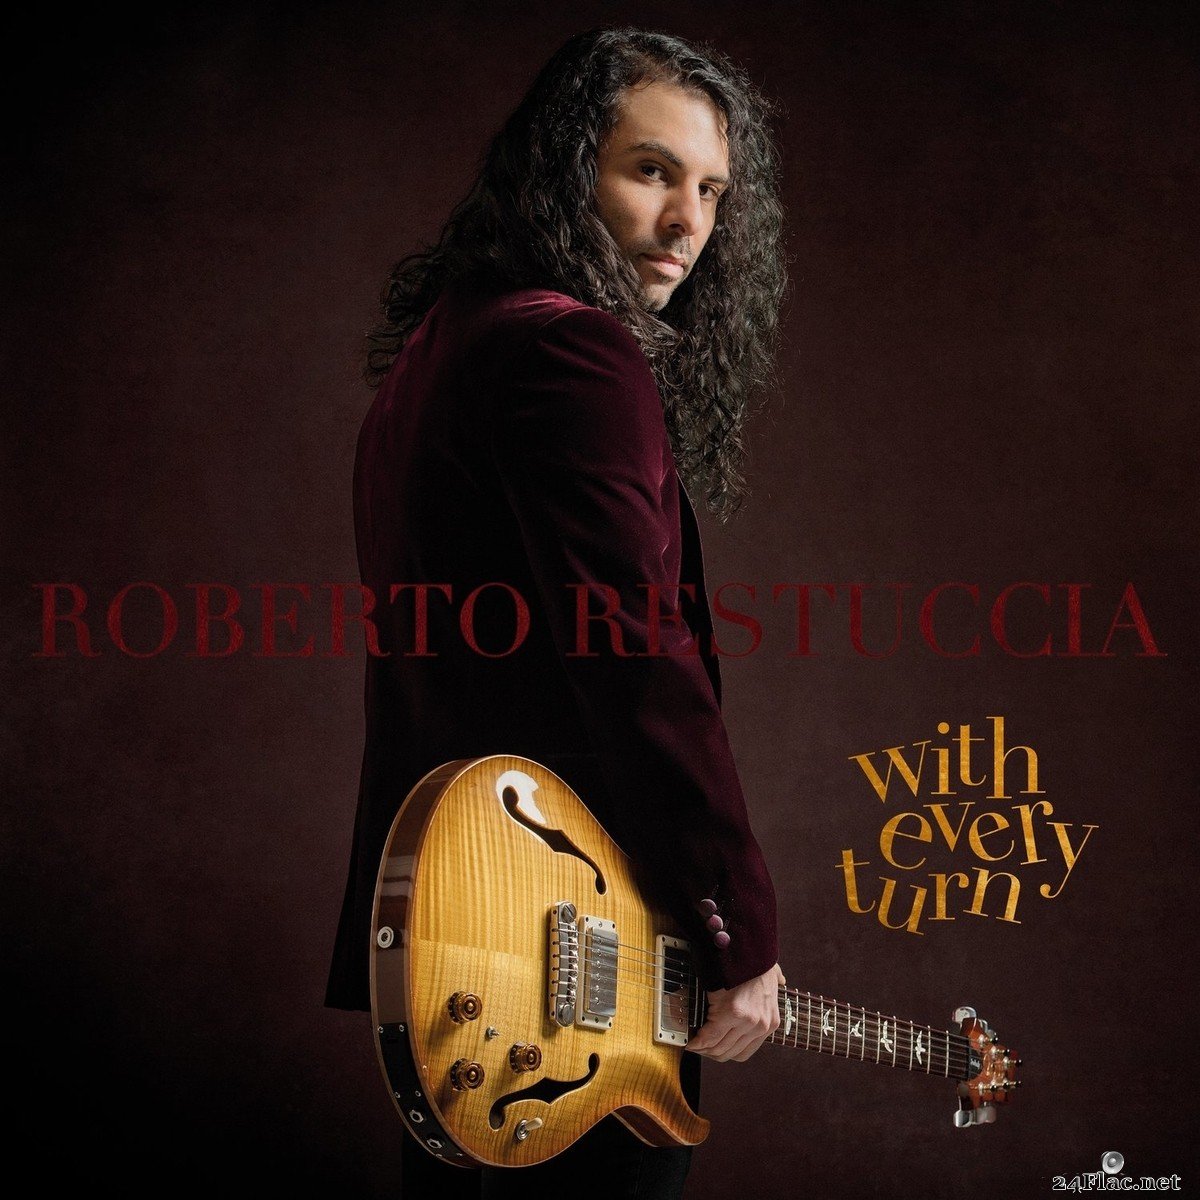 Roberto Restuccia - With Every Turn (2021) FLAC